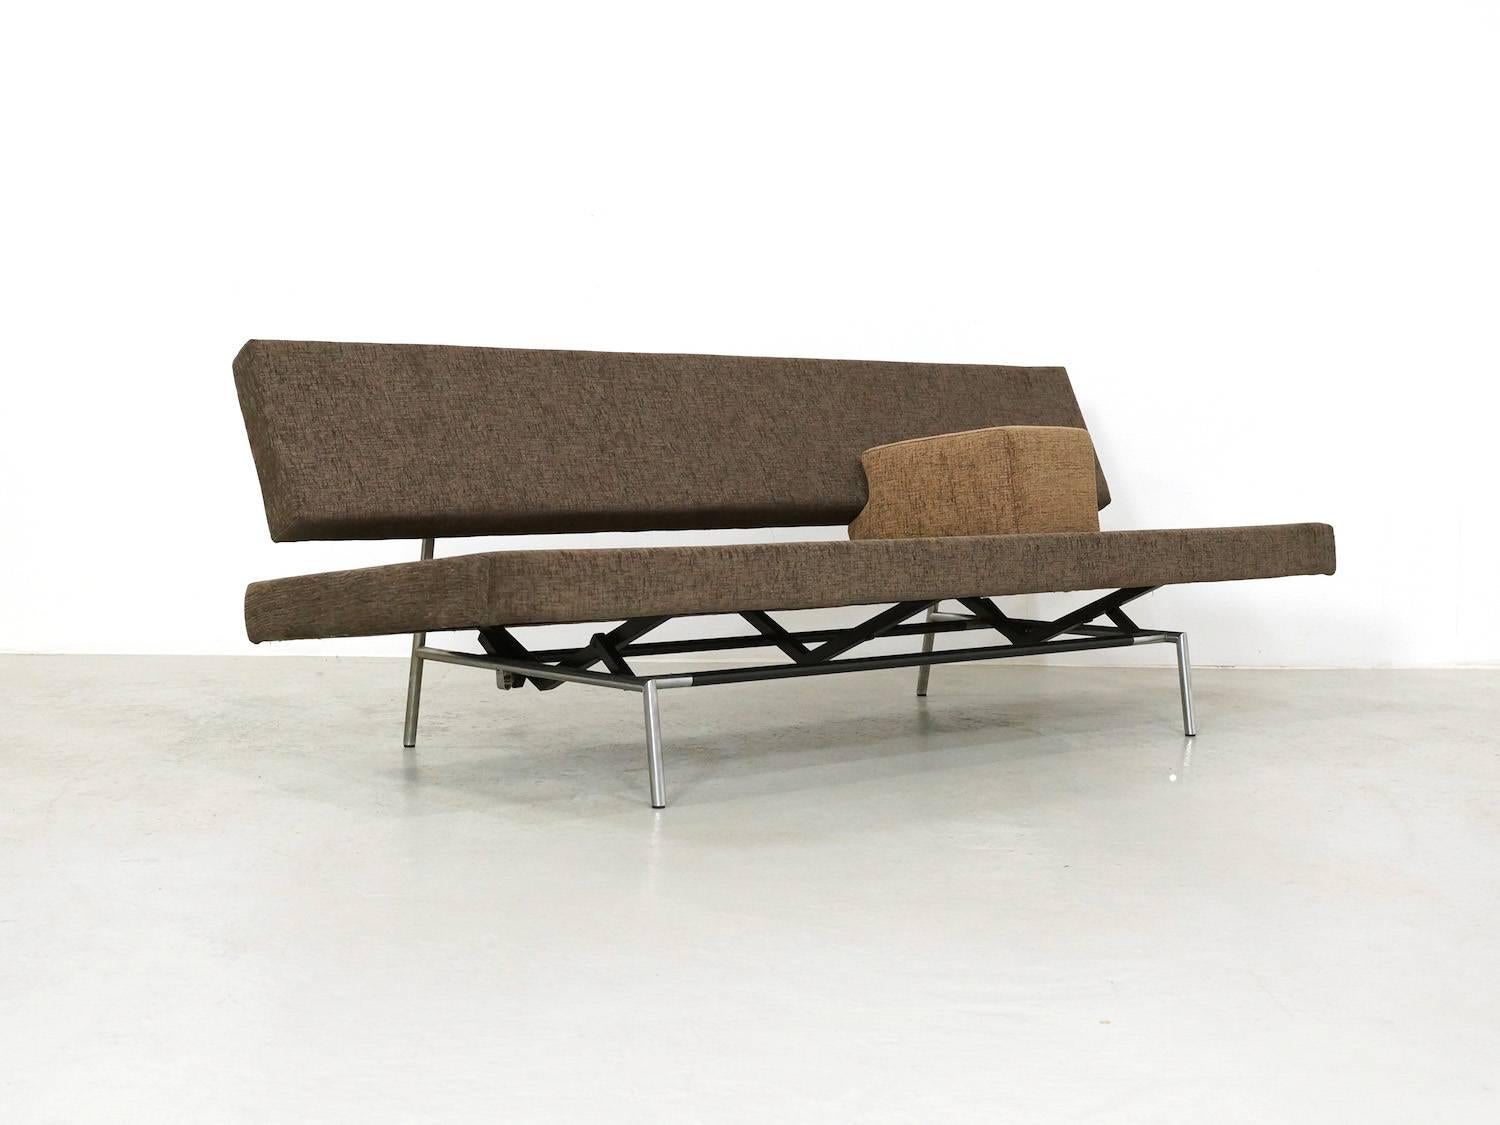 Daybed or sleeping sofa designed by Martin Visser for 't Spectrum Bergeyk, Holland, 1960.
This sofa can be turned from a sofa into a daybed by just pulling out the seat. The sofa has a round tubular frame in chrome and black lacquered metal and it